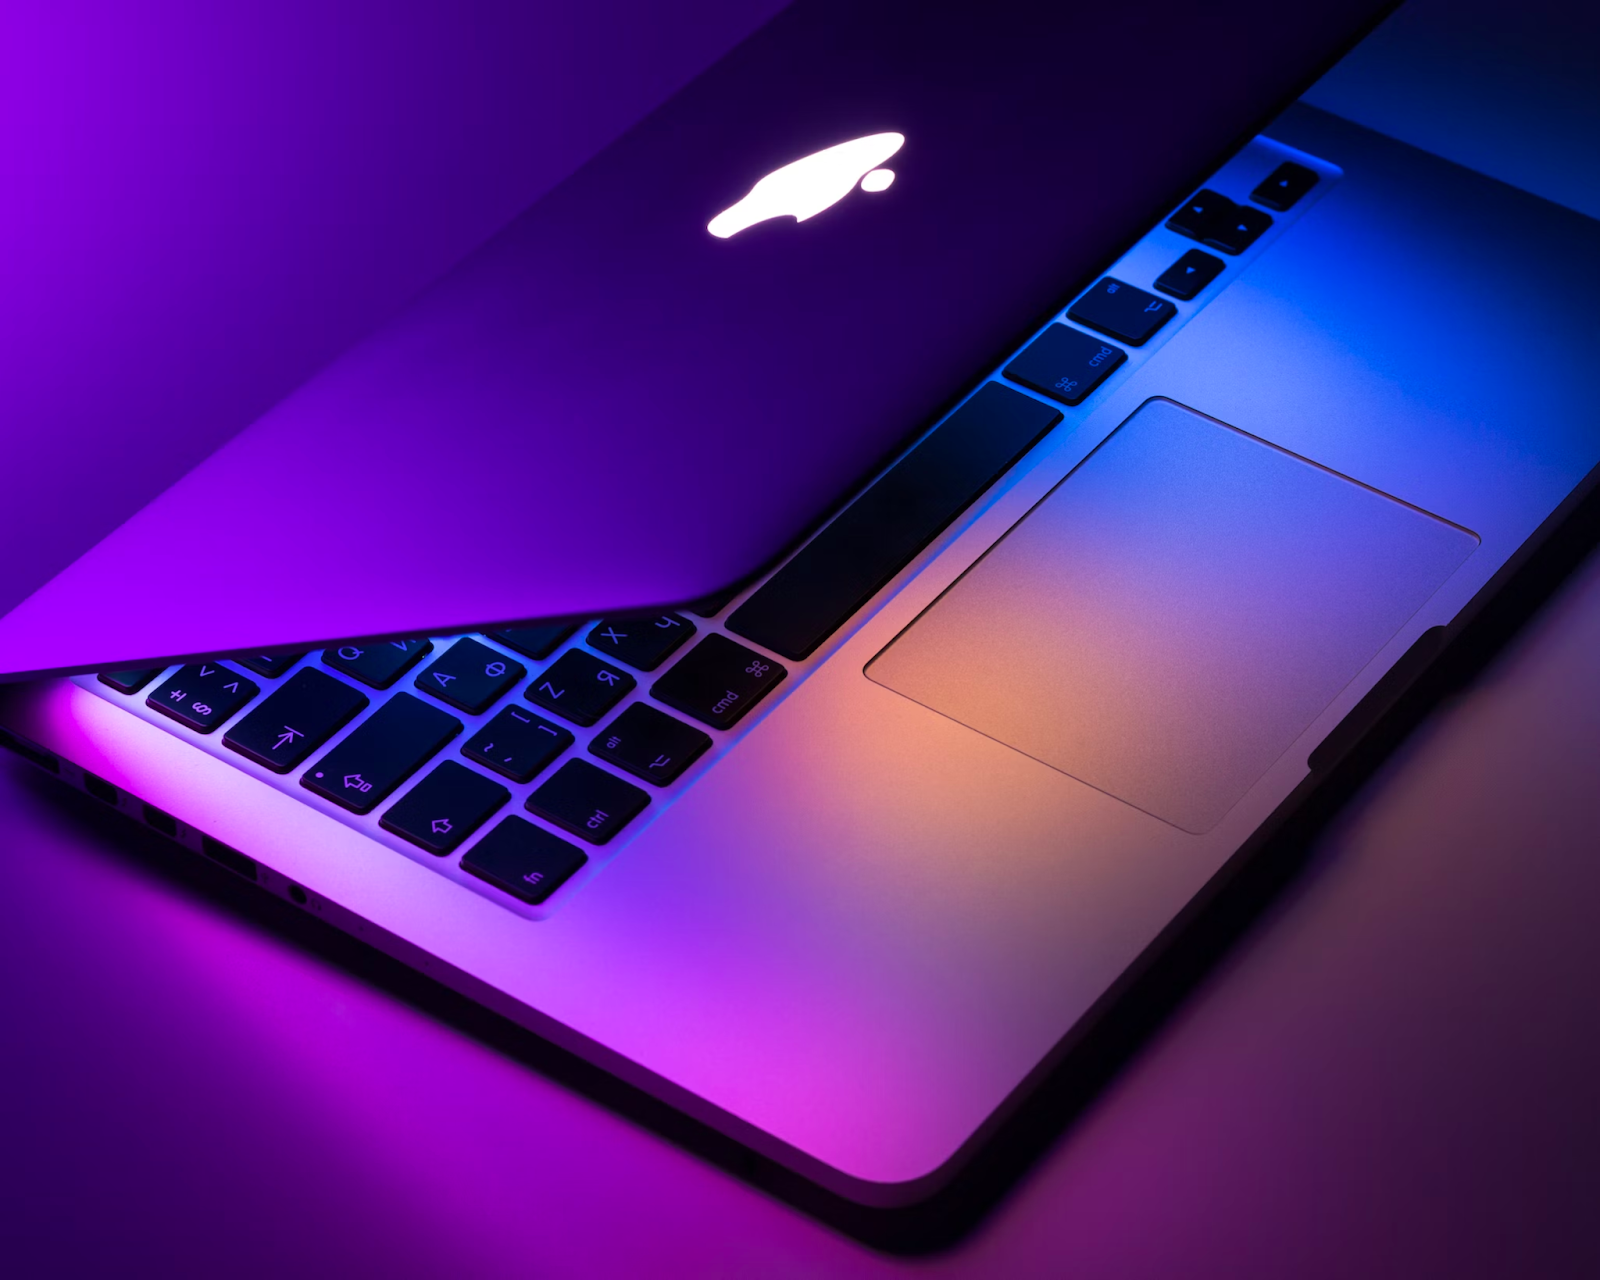 We’ve got you convered with our quick fix solutions for the most common Mac issues. Image: Dmitry Chernyshov / Unsplash